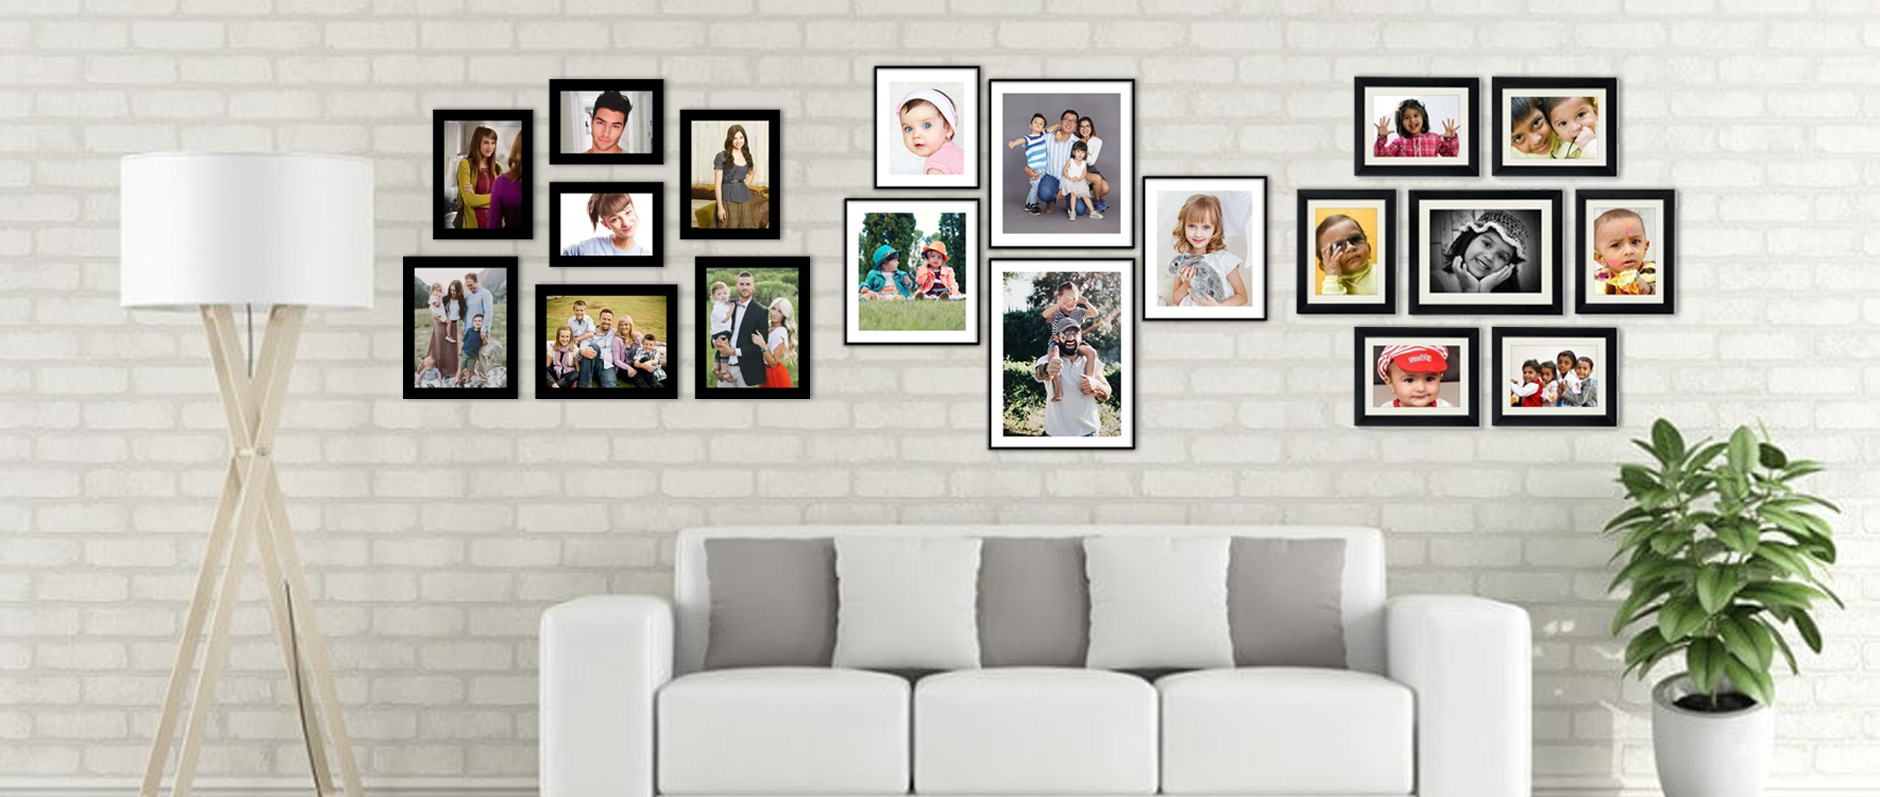 Frame your favorite moments